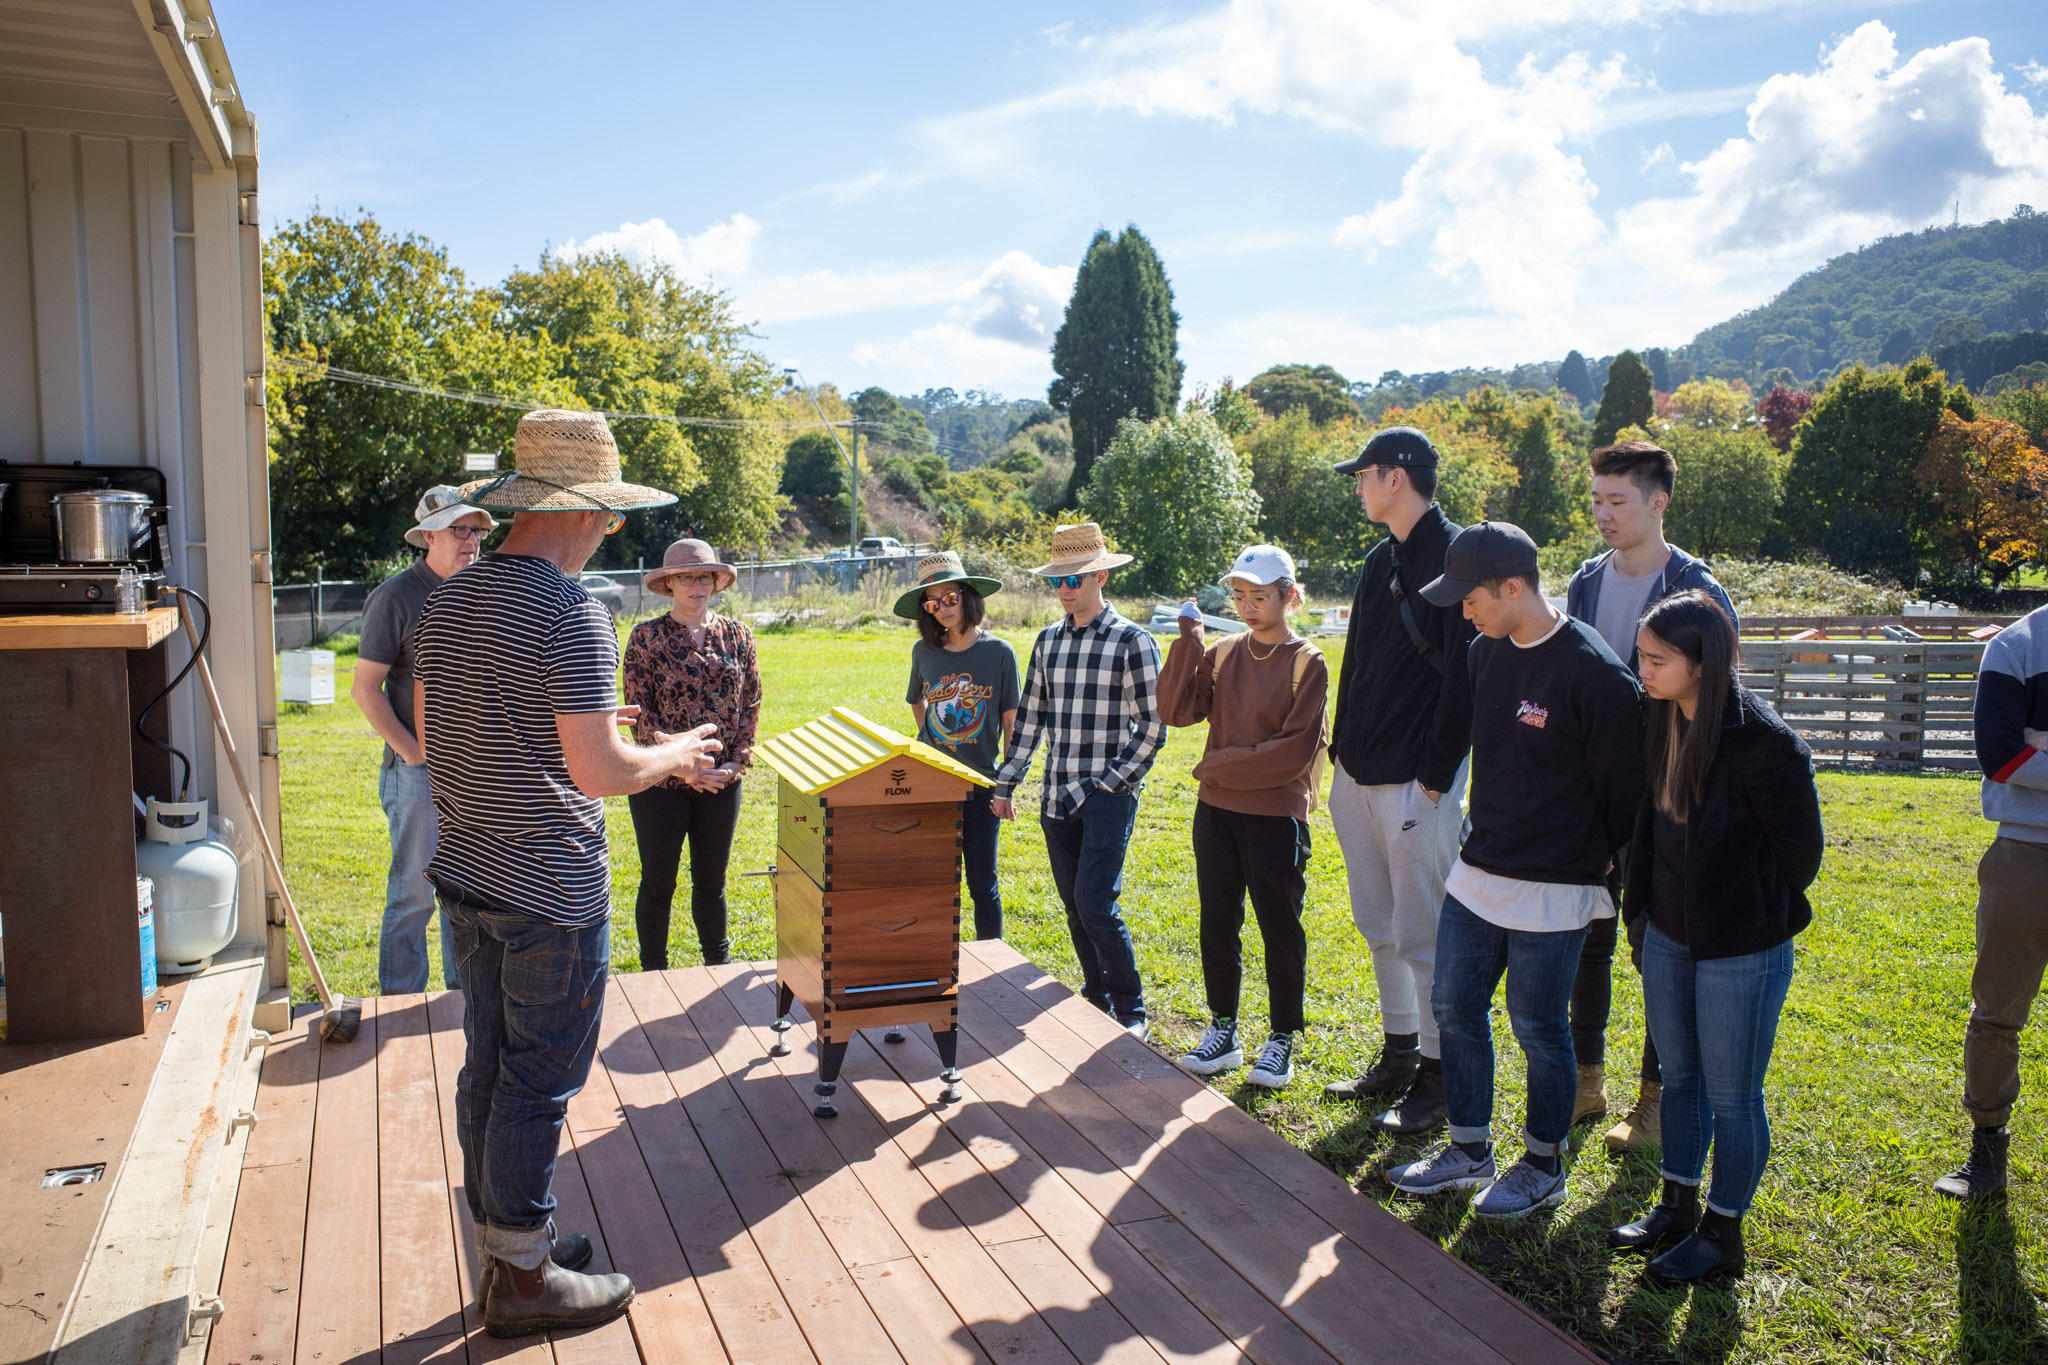 A corporate group exercise and beekeeping visit